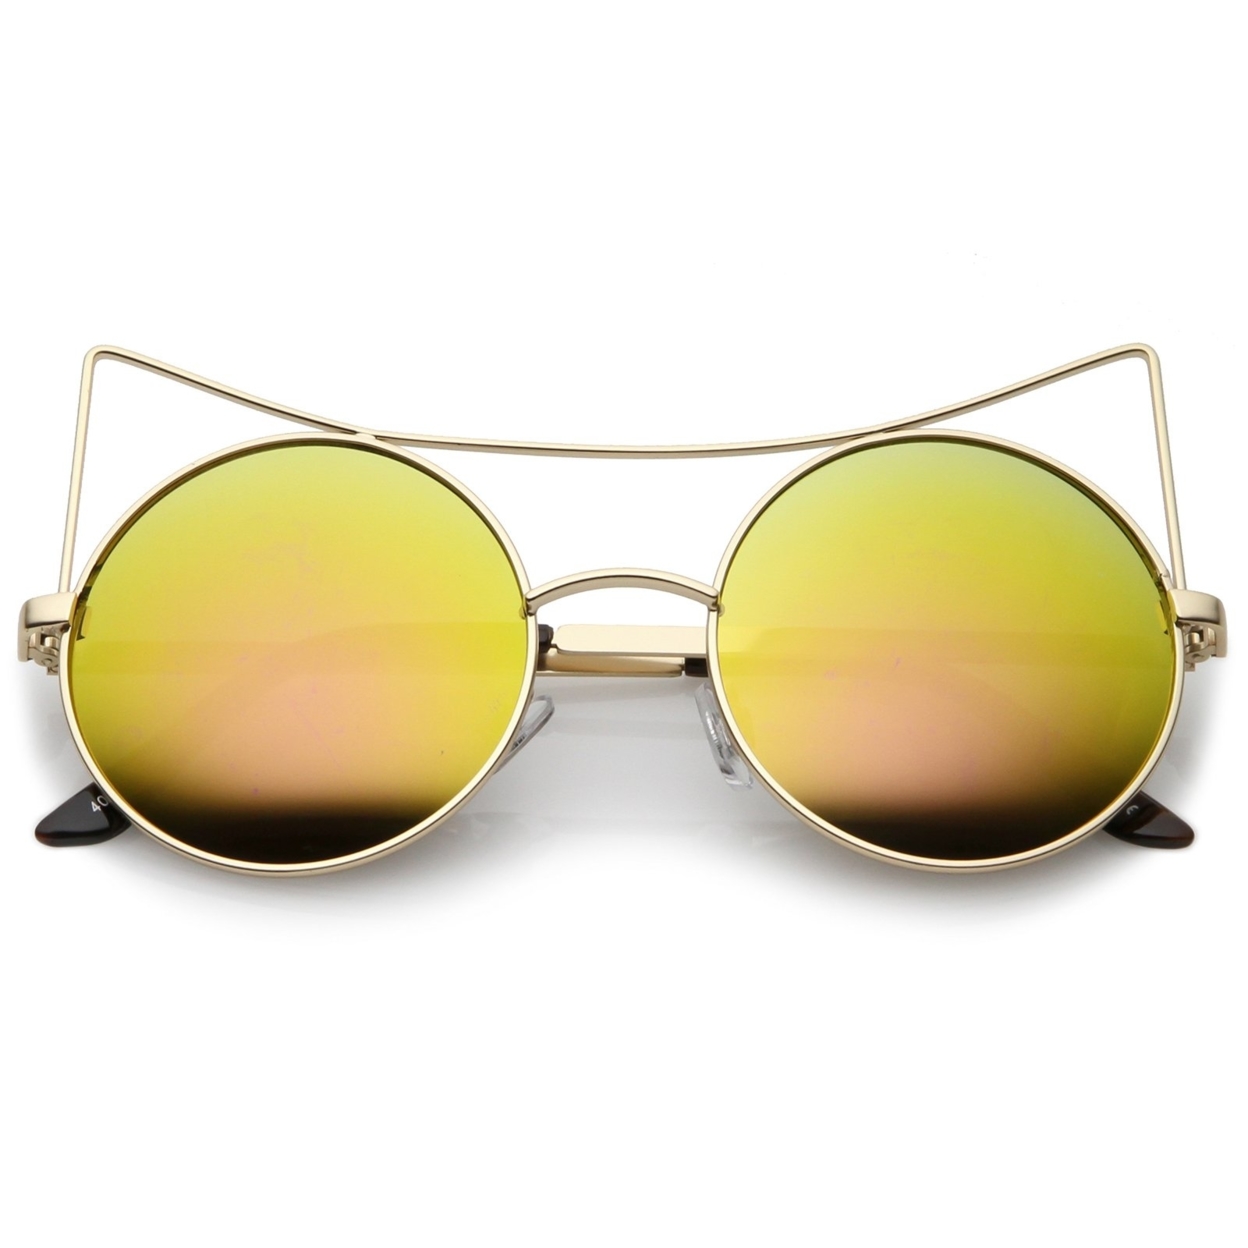 Women's Oversize Open Metal Cat Eye Sunglasses With Colored Mirror Flat Lens 54mm - Gold / Yellow Pink Mirror